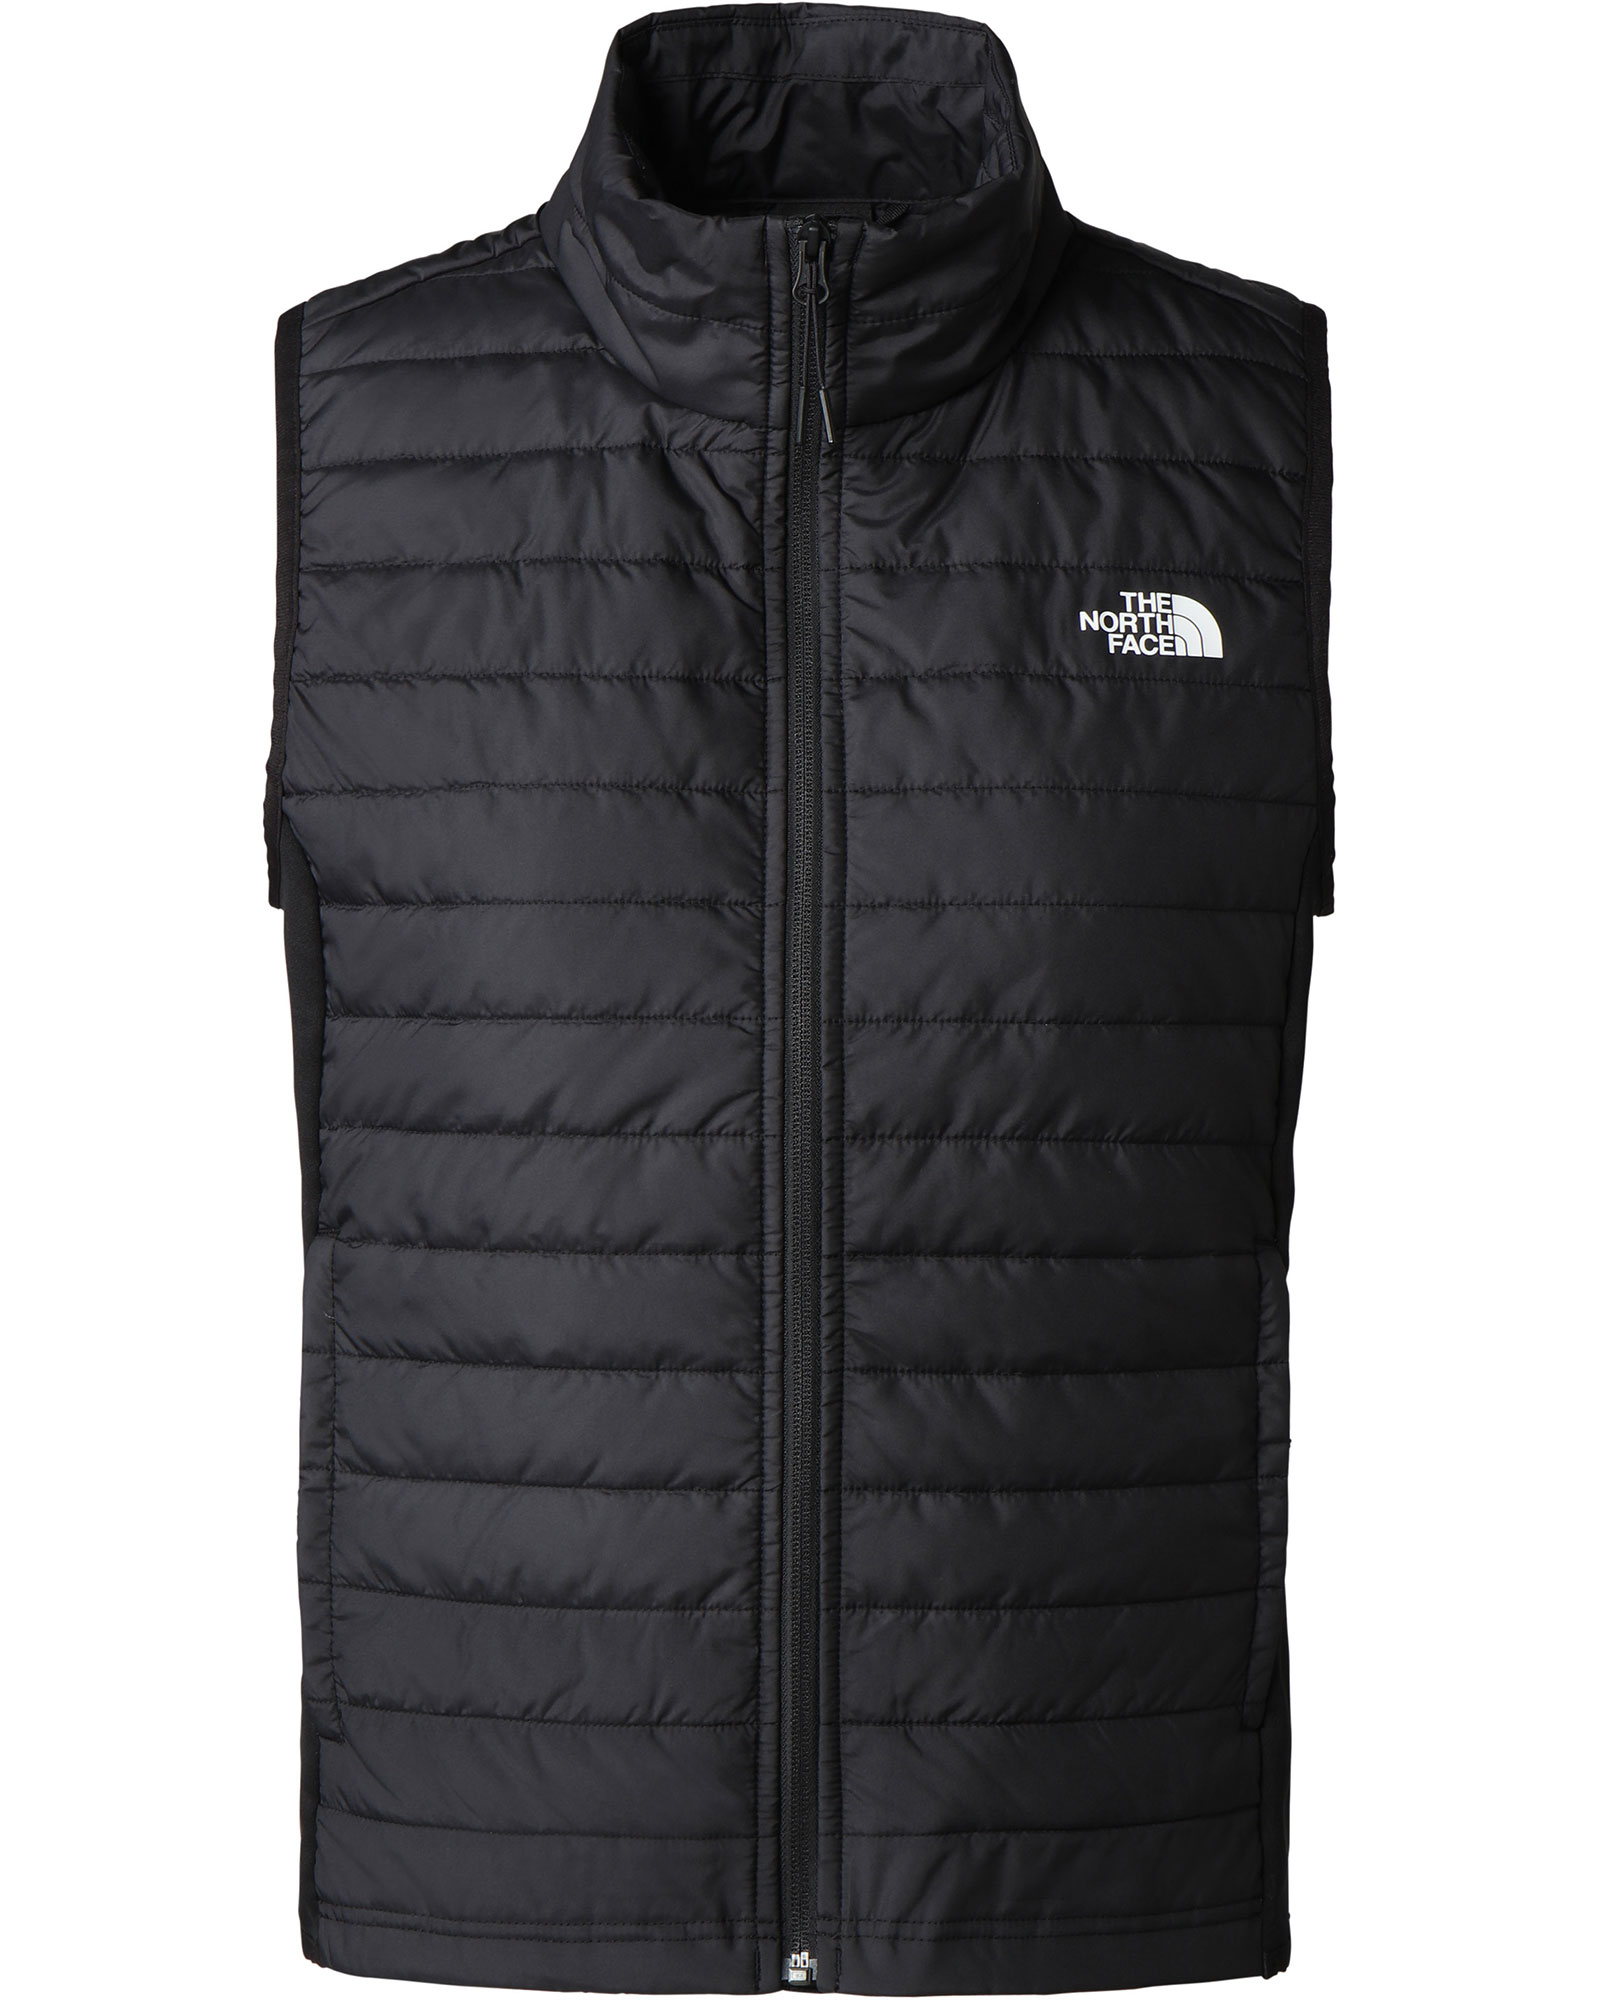 The North Face Canyonlands Hybrid Womens Vest